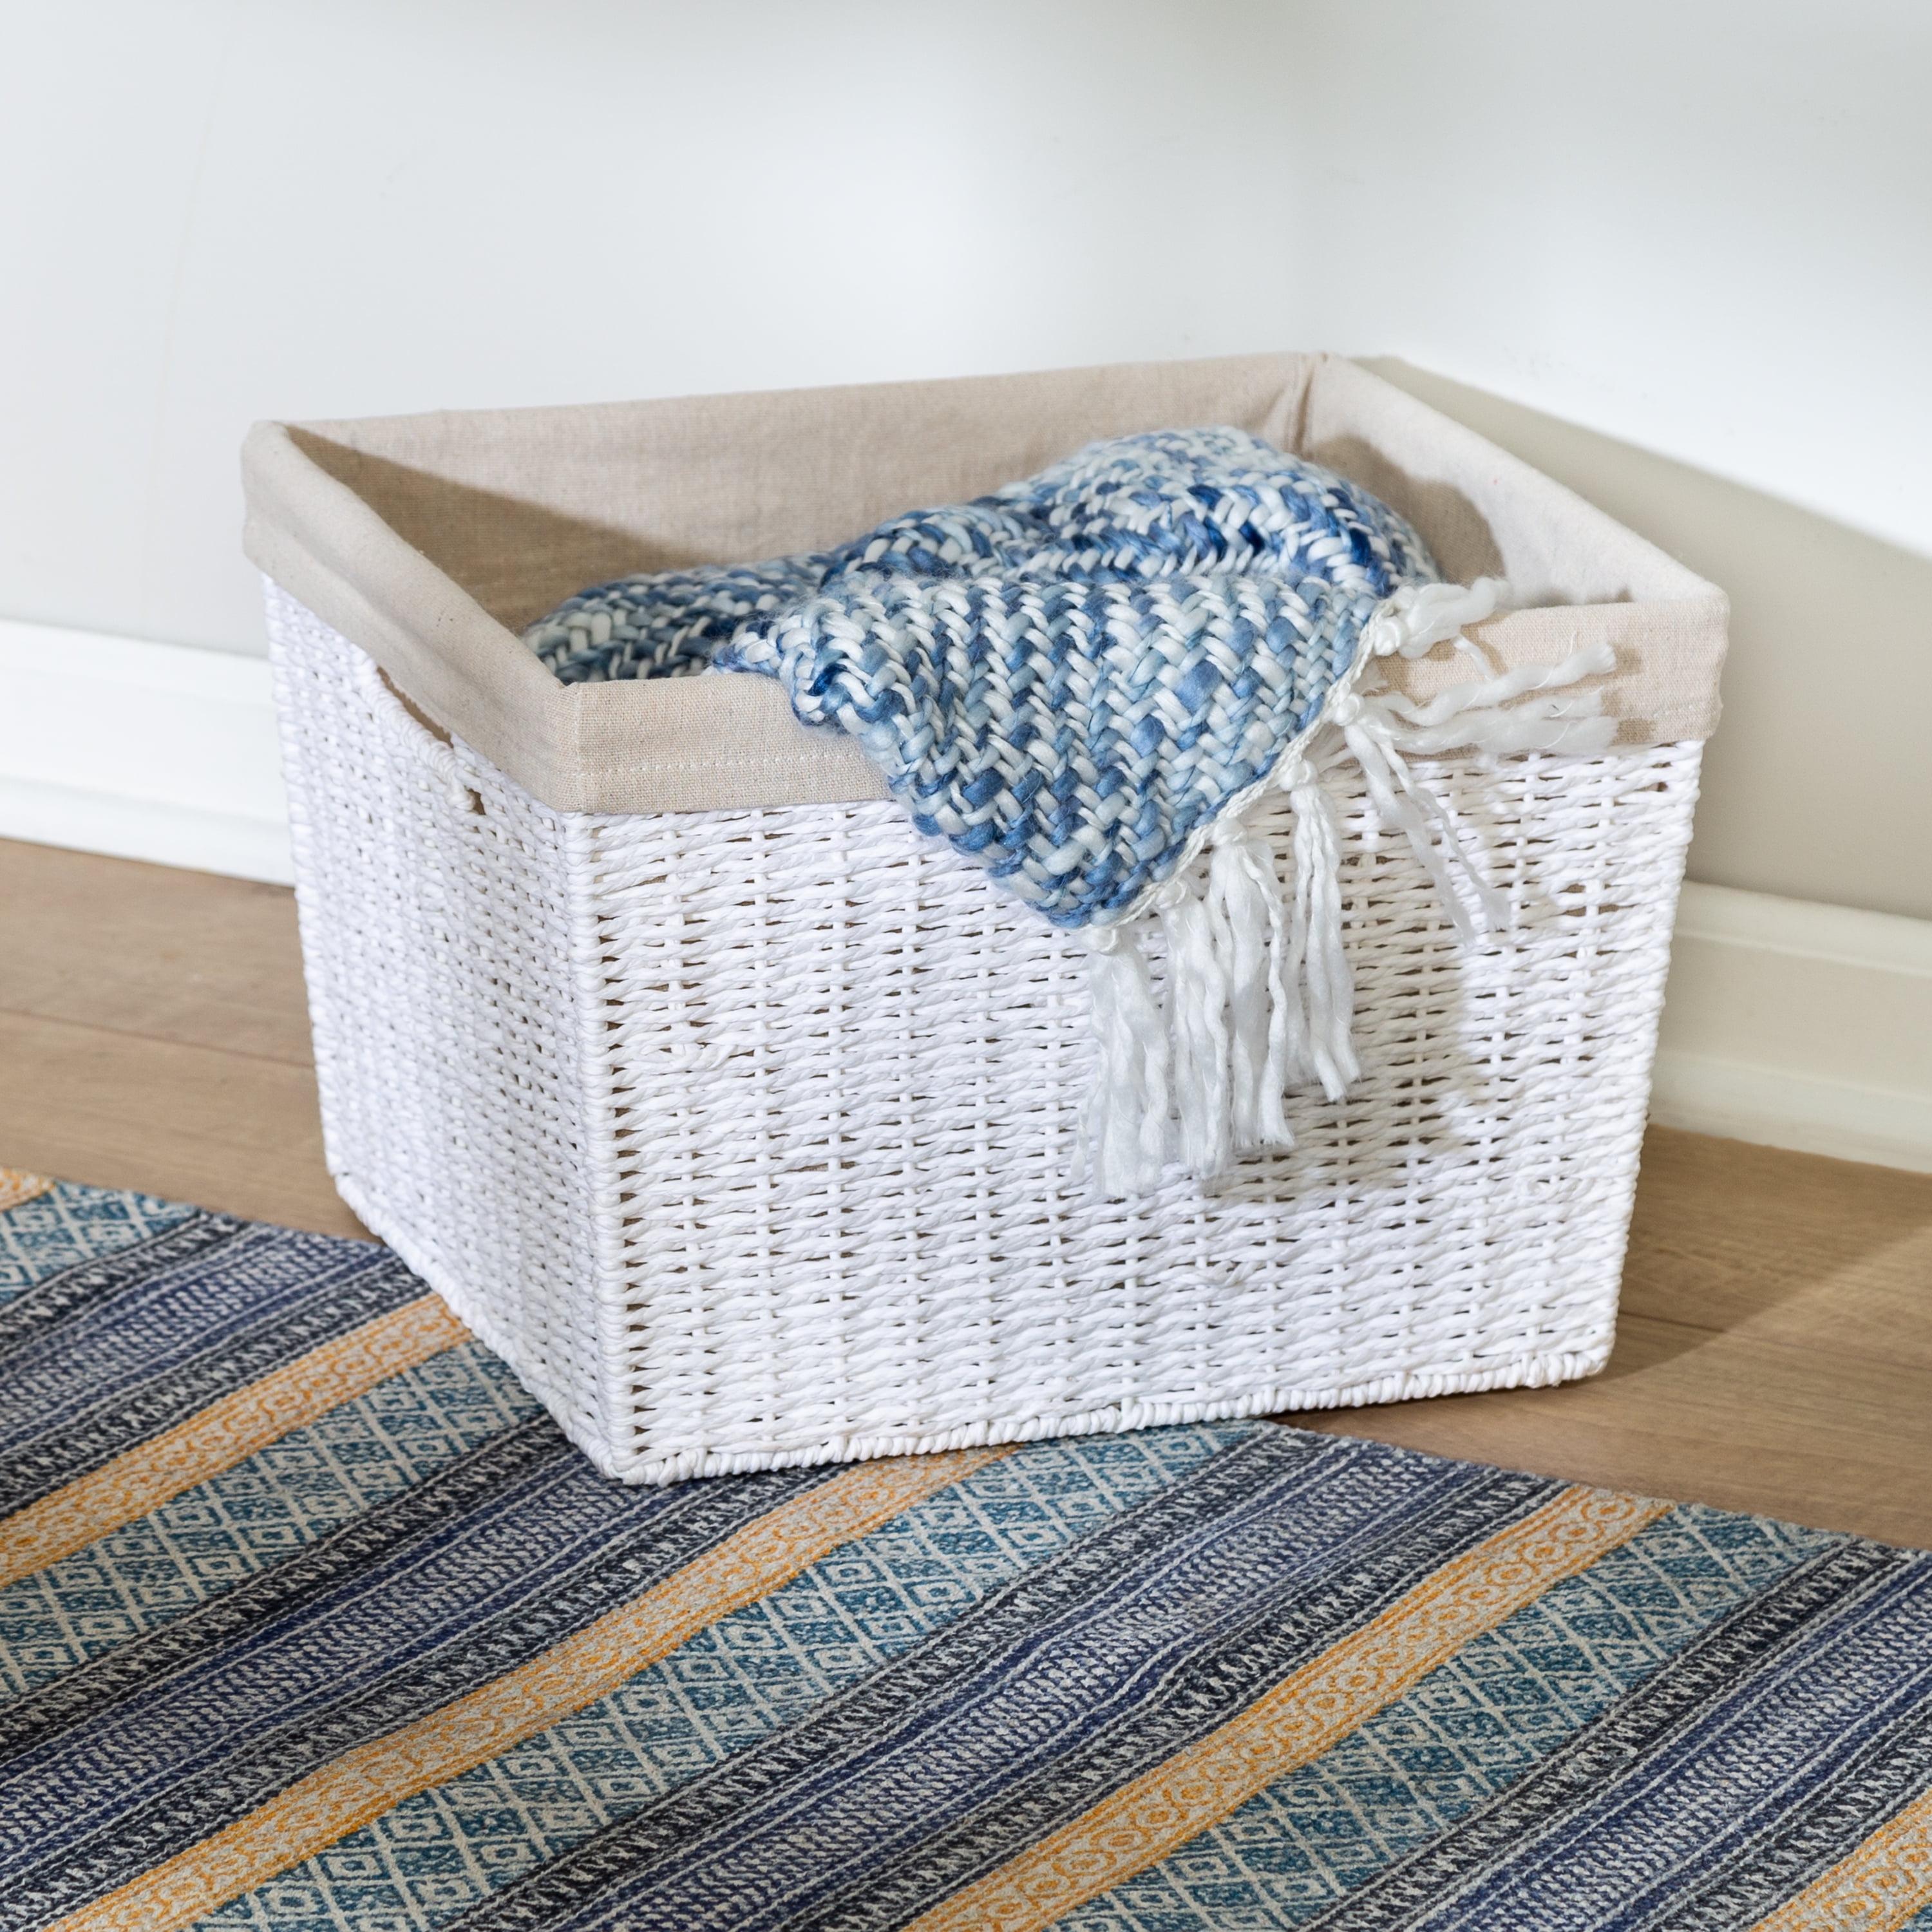 Eco-Friendly White and Natural Rectangular Paper Rope Storage Basket